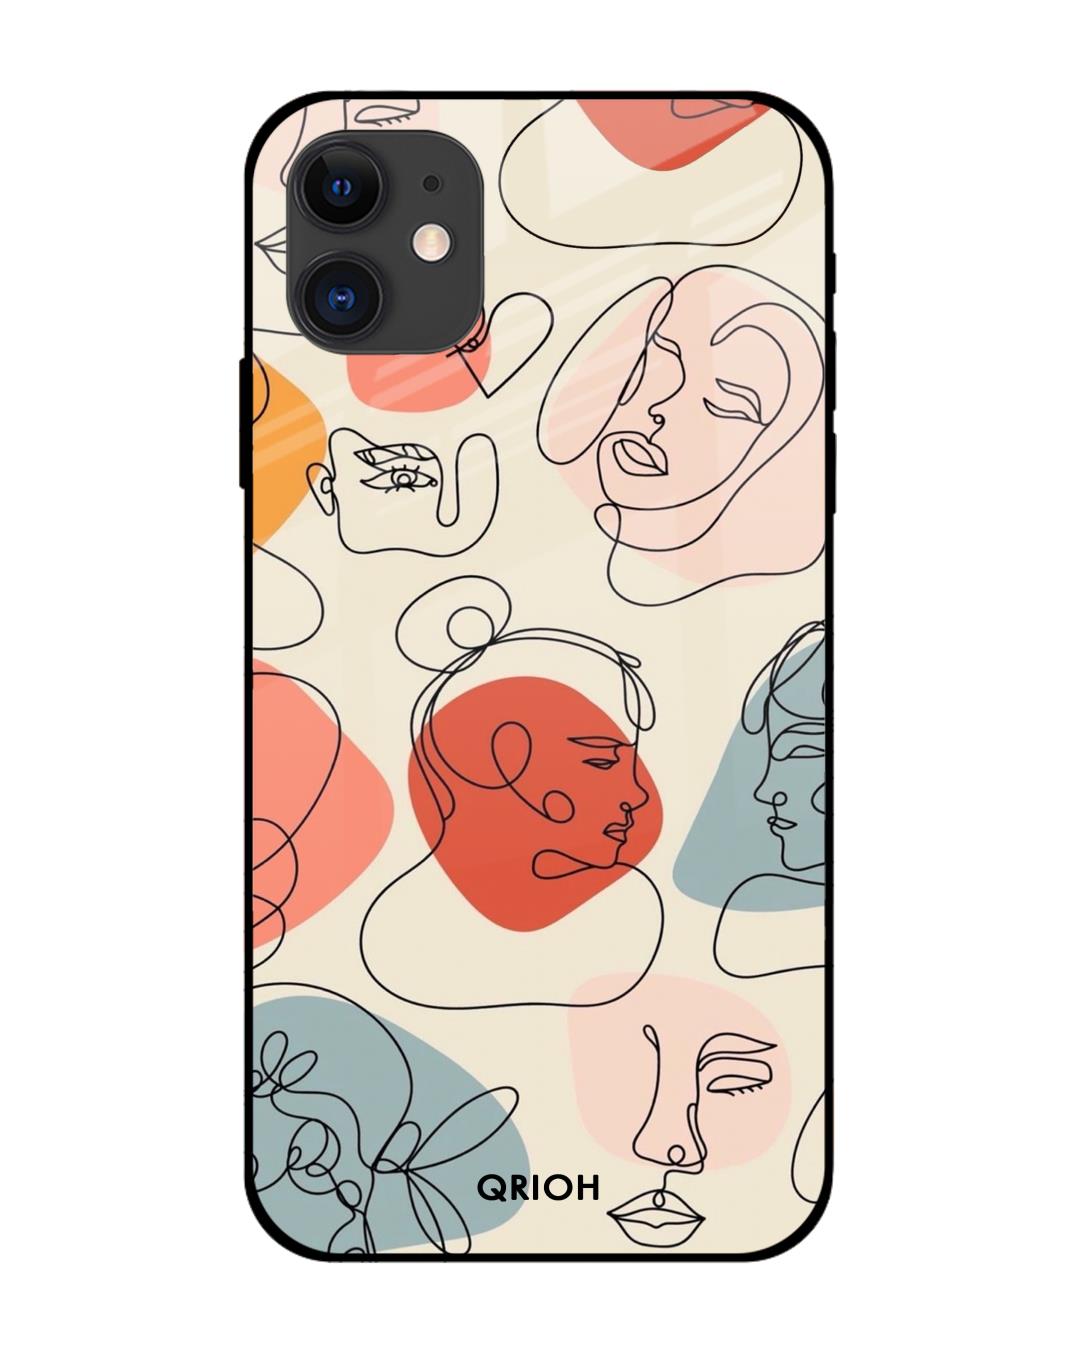 Buy Abstract Faces Printed Premium Glass Cover For iPhone 12 mini ...